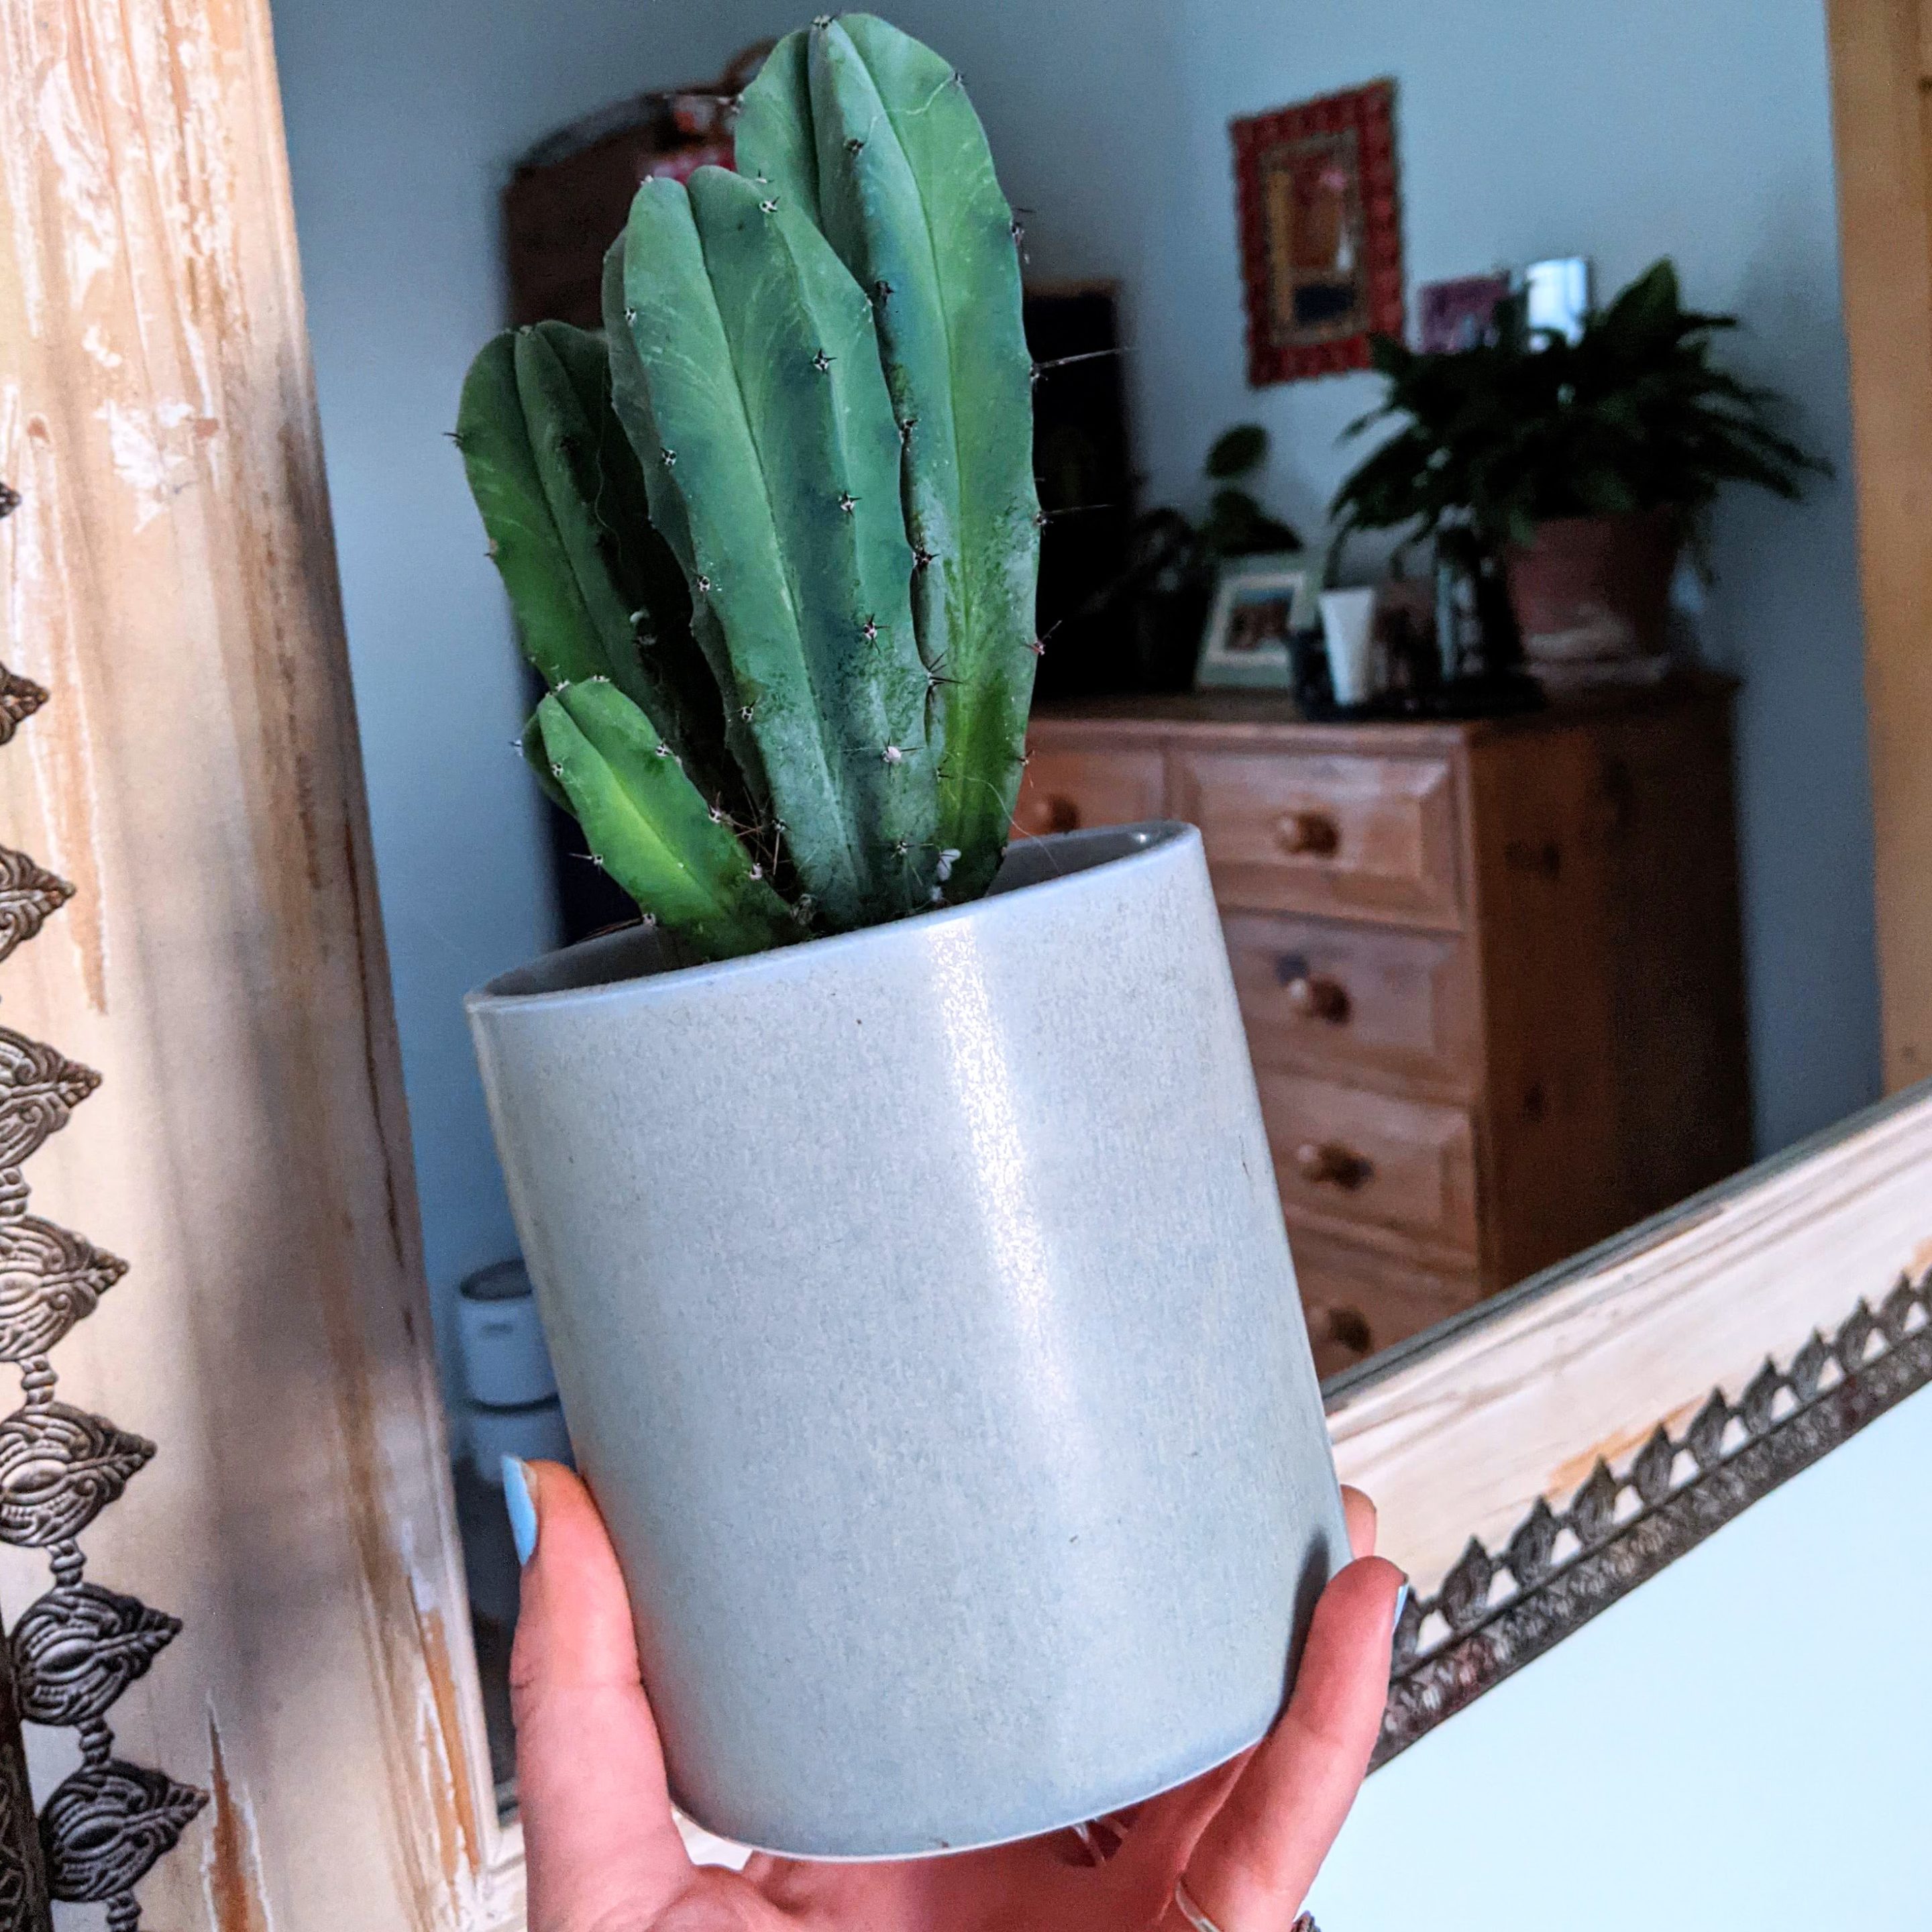 Straight pot with Cactus